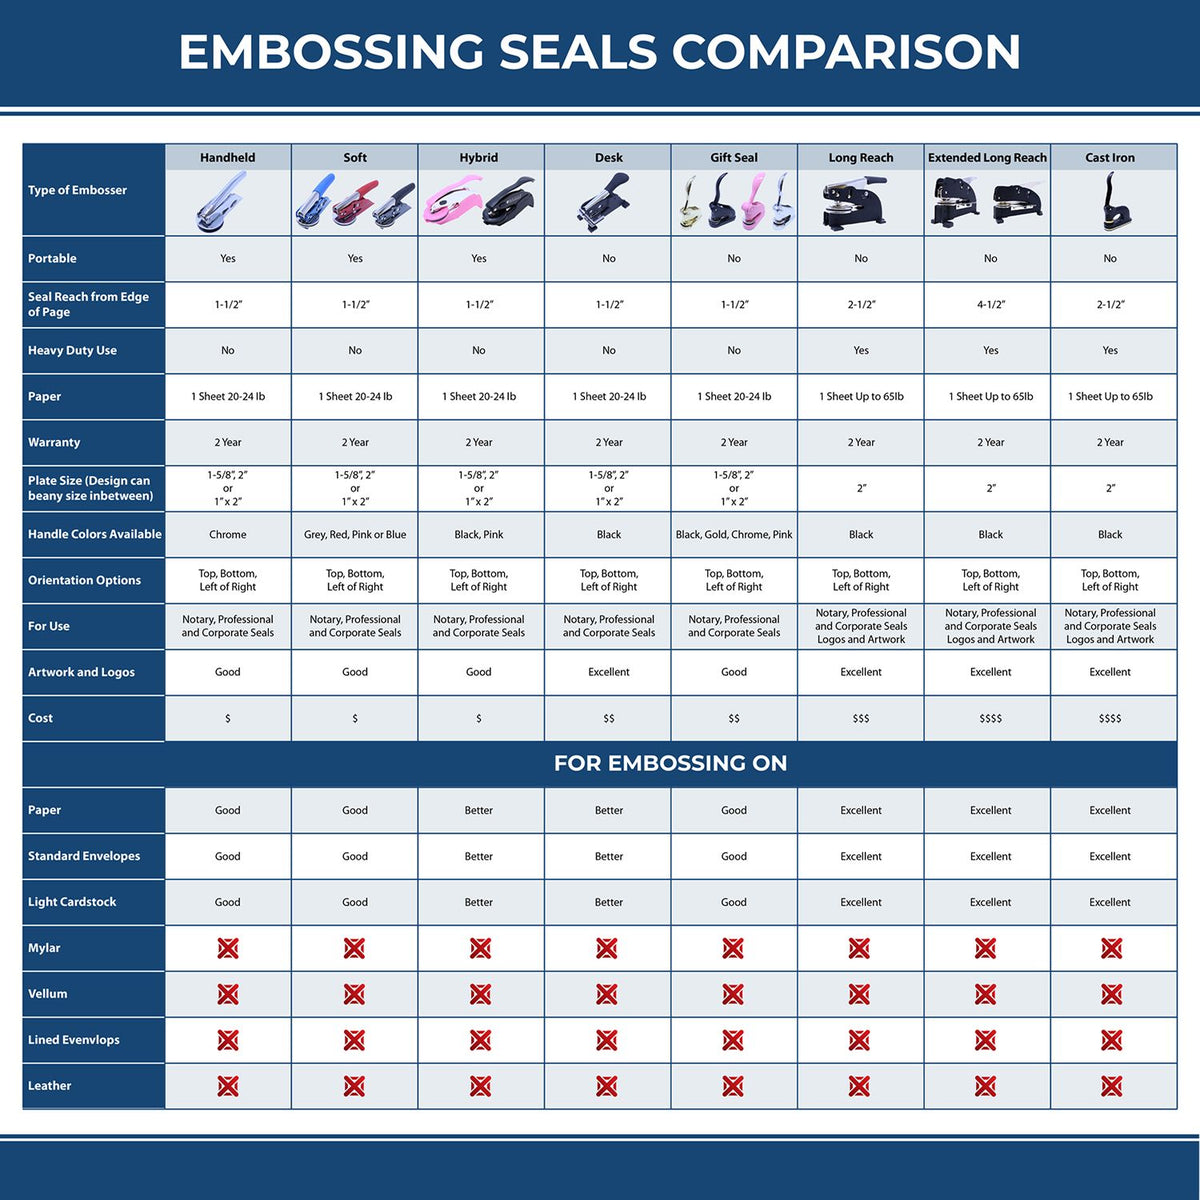 A comparison chart for the different types of mount models available for the Heavy Duty Cast Iron Kansas Geologist Seal Embosser